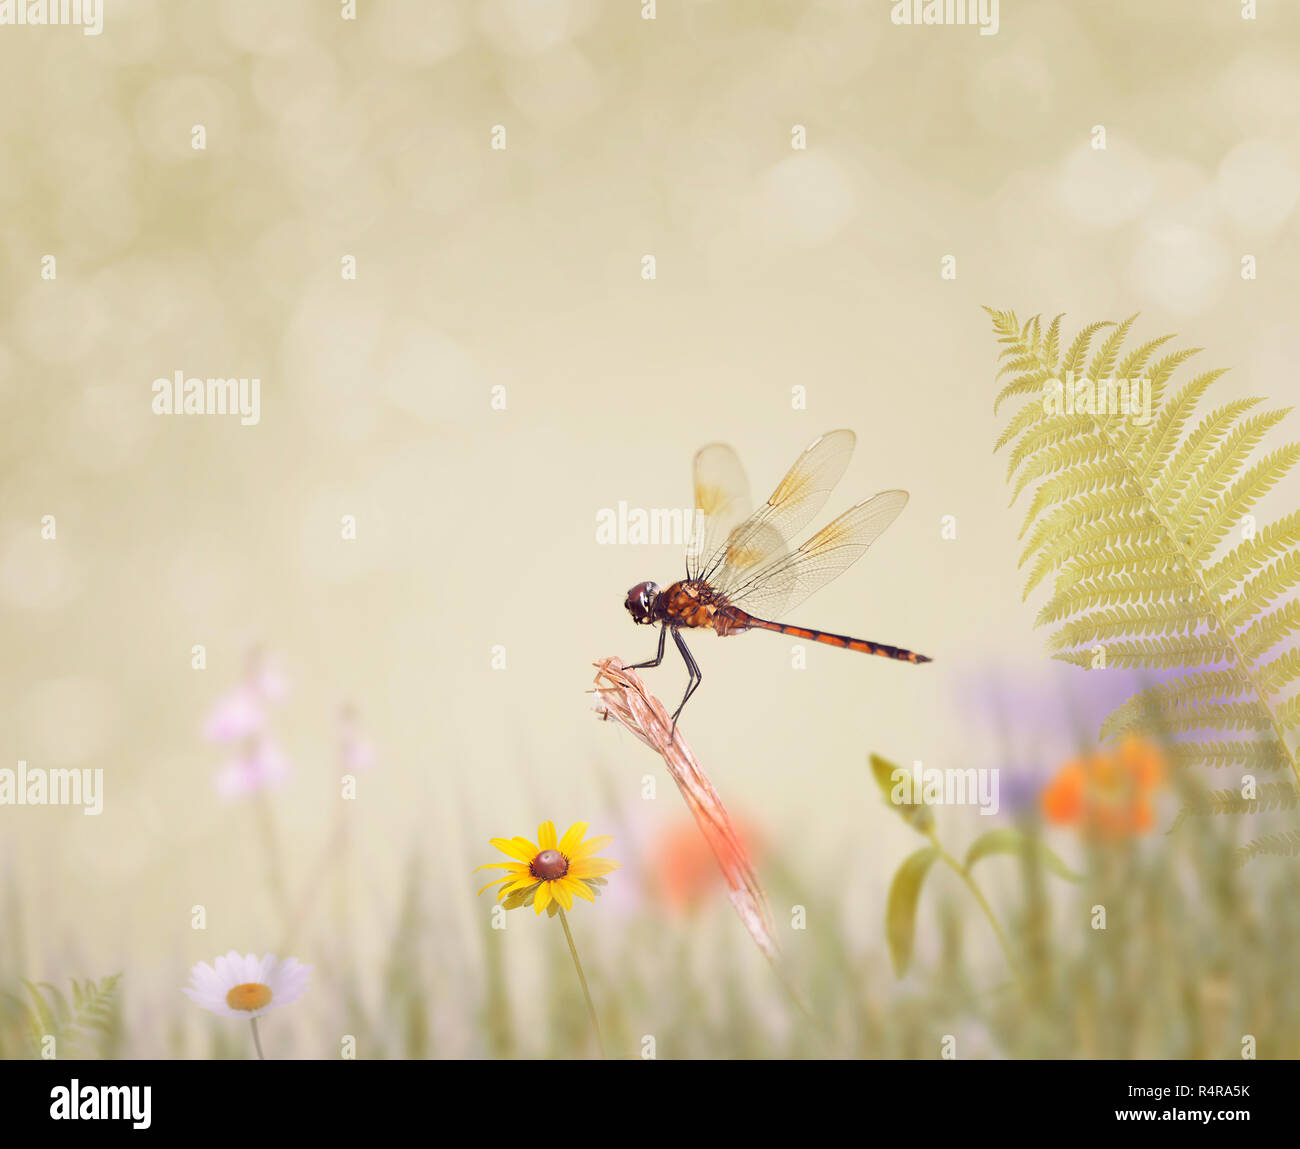 dragonfly sits on the grass Stock Photo